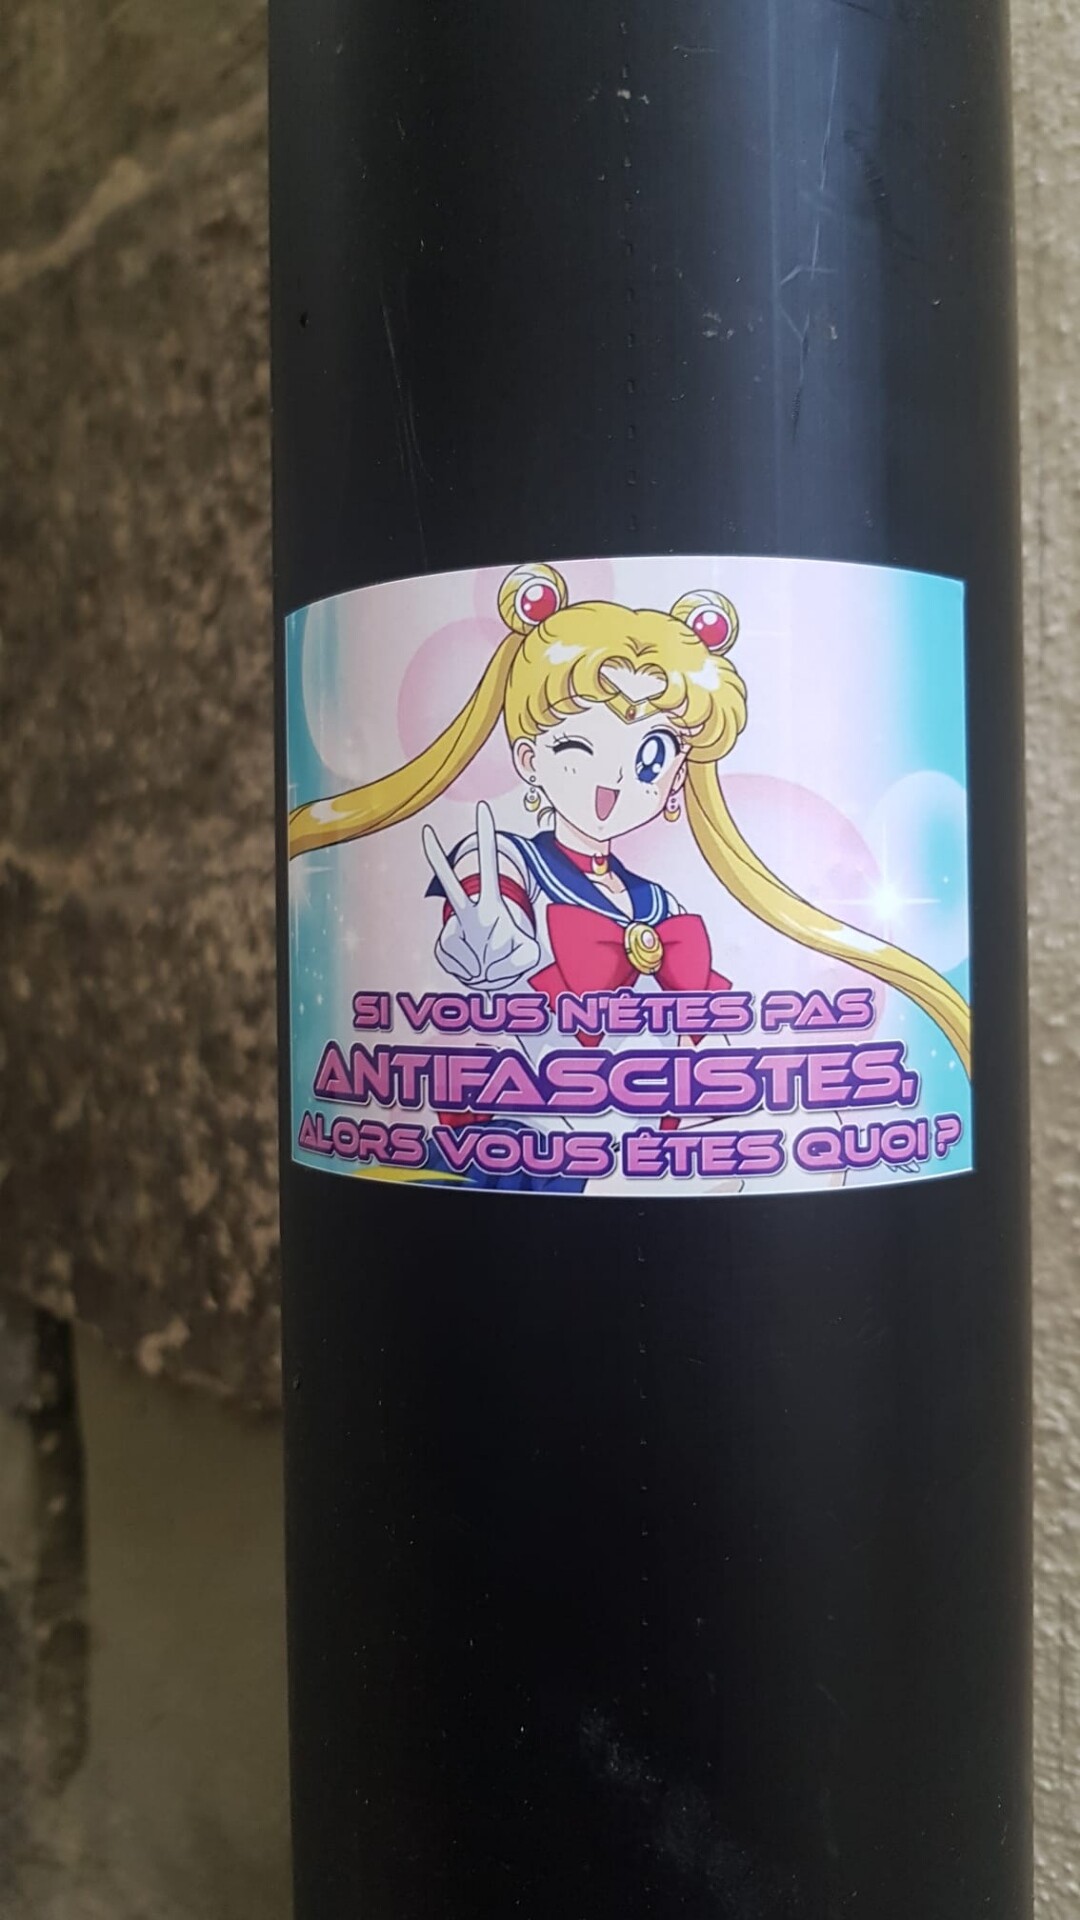 Sailor moon sticker on a pole that says "if you're not anti-fascist, what are you?" In French